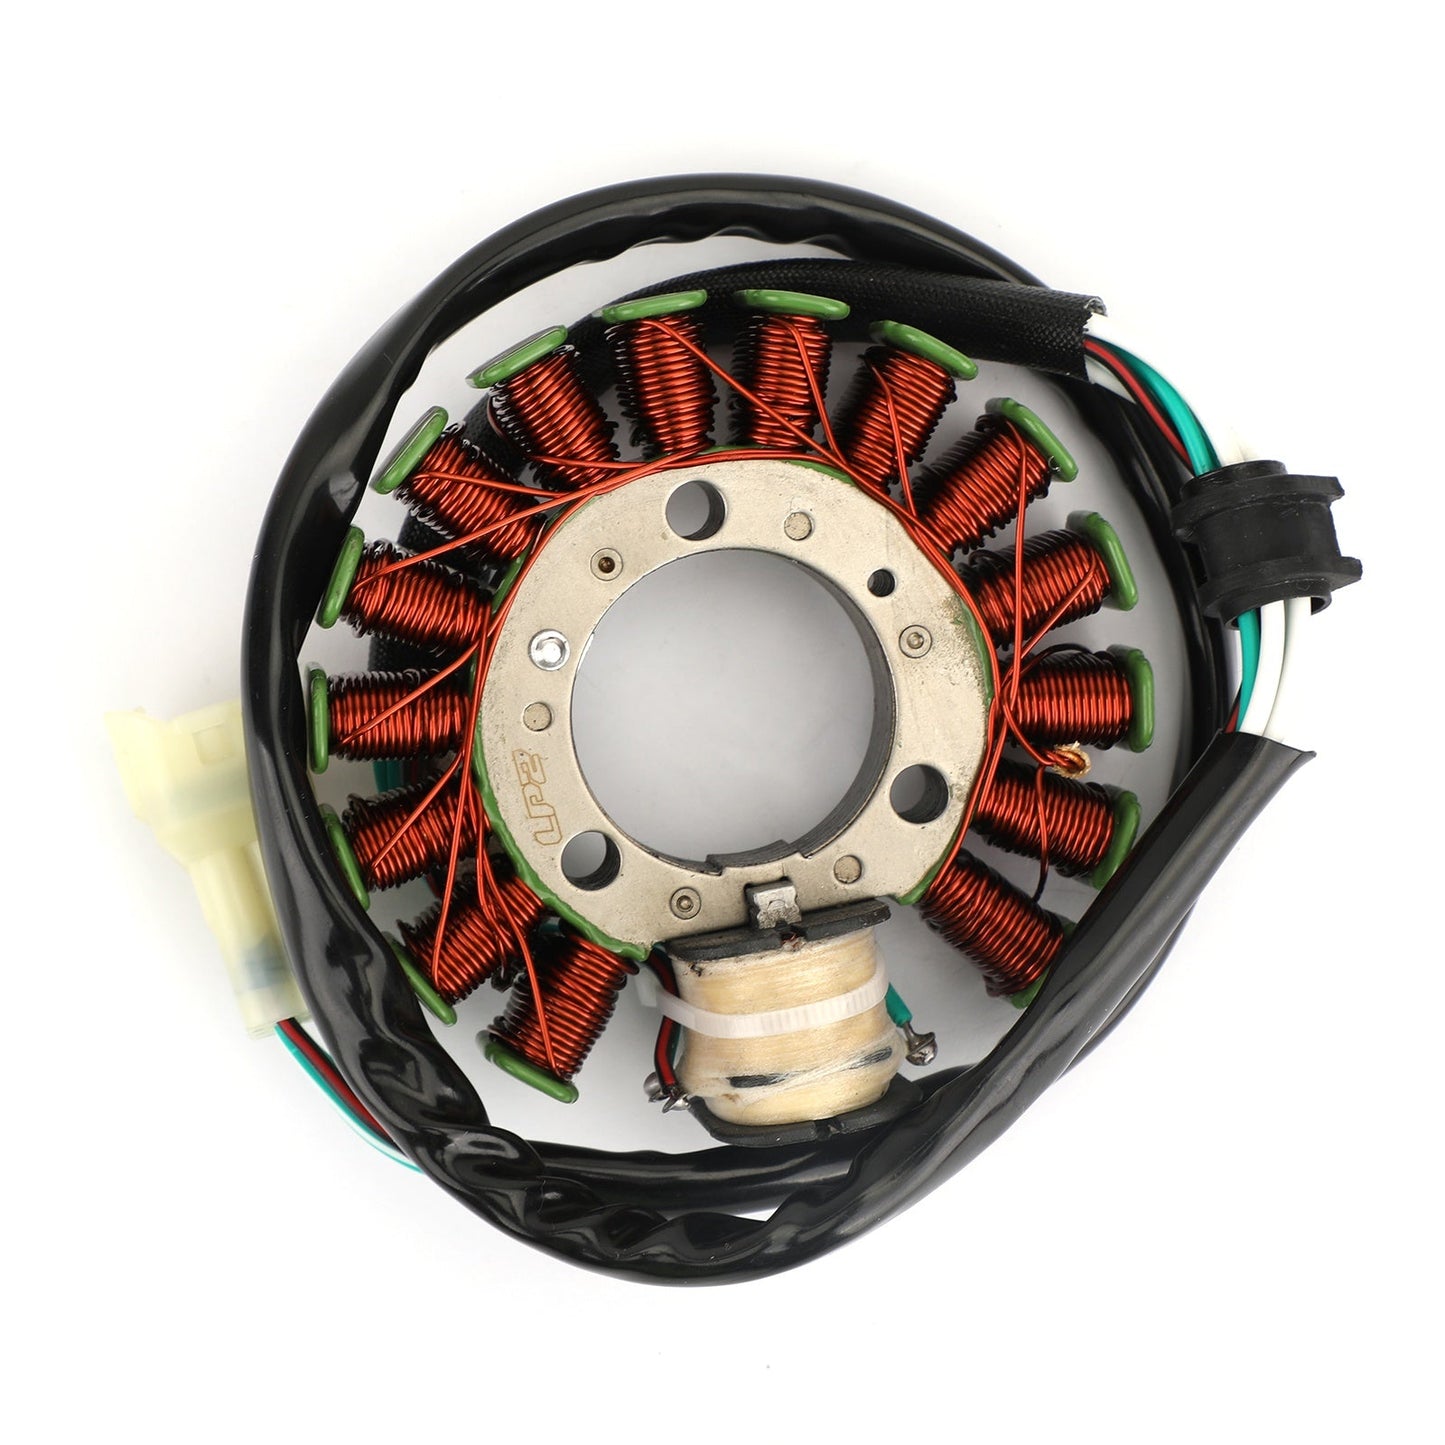 Stator Generator for Yamaha DT230 Lanza 230 1997-1998 Repl.# 4TP-85510-00